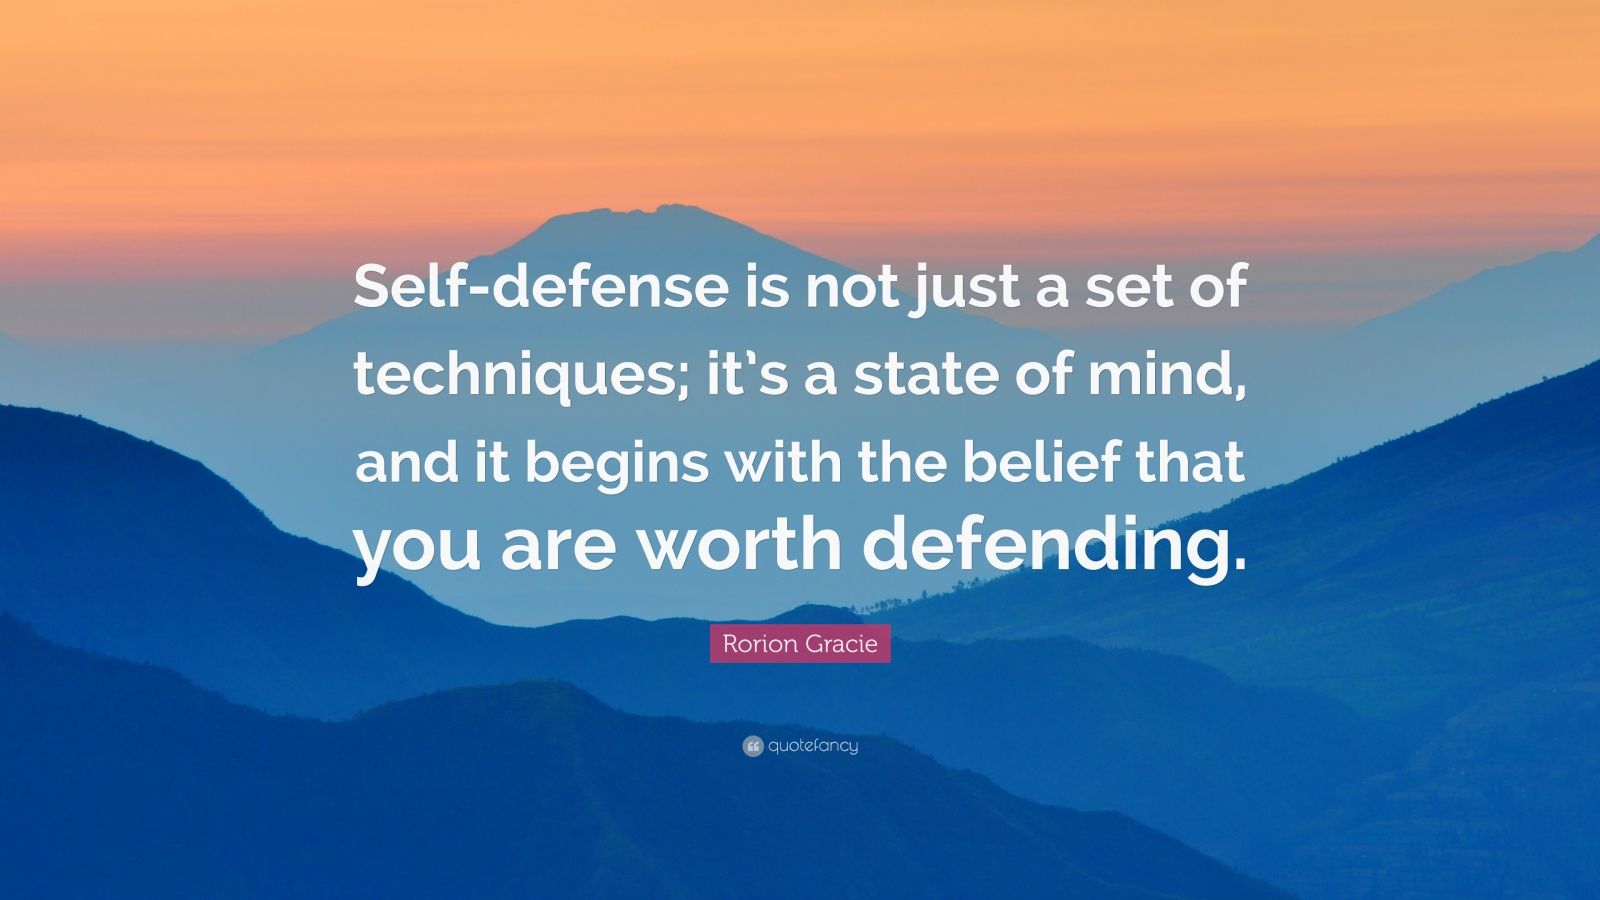 Rorion Gracie Quote: “Self-defense is not just a set of techniques; it ...